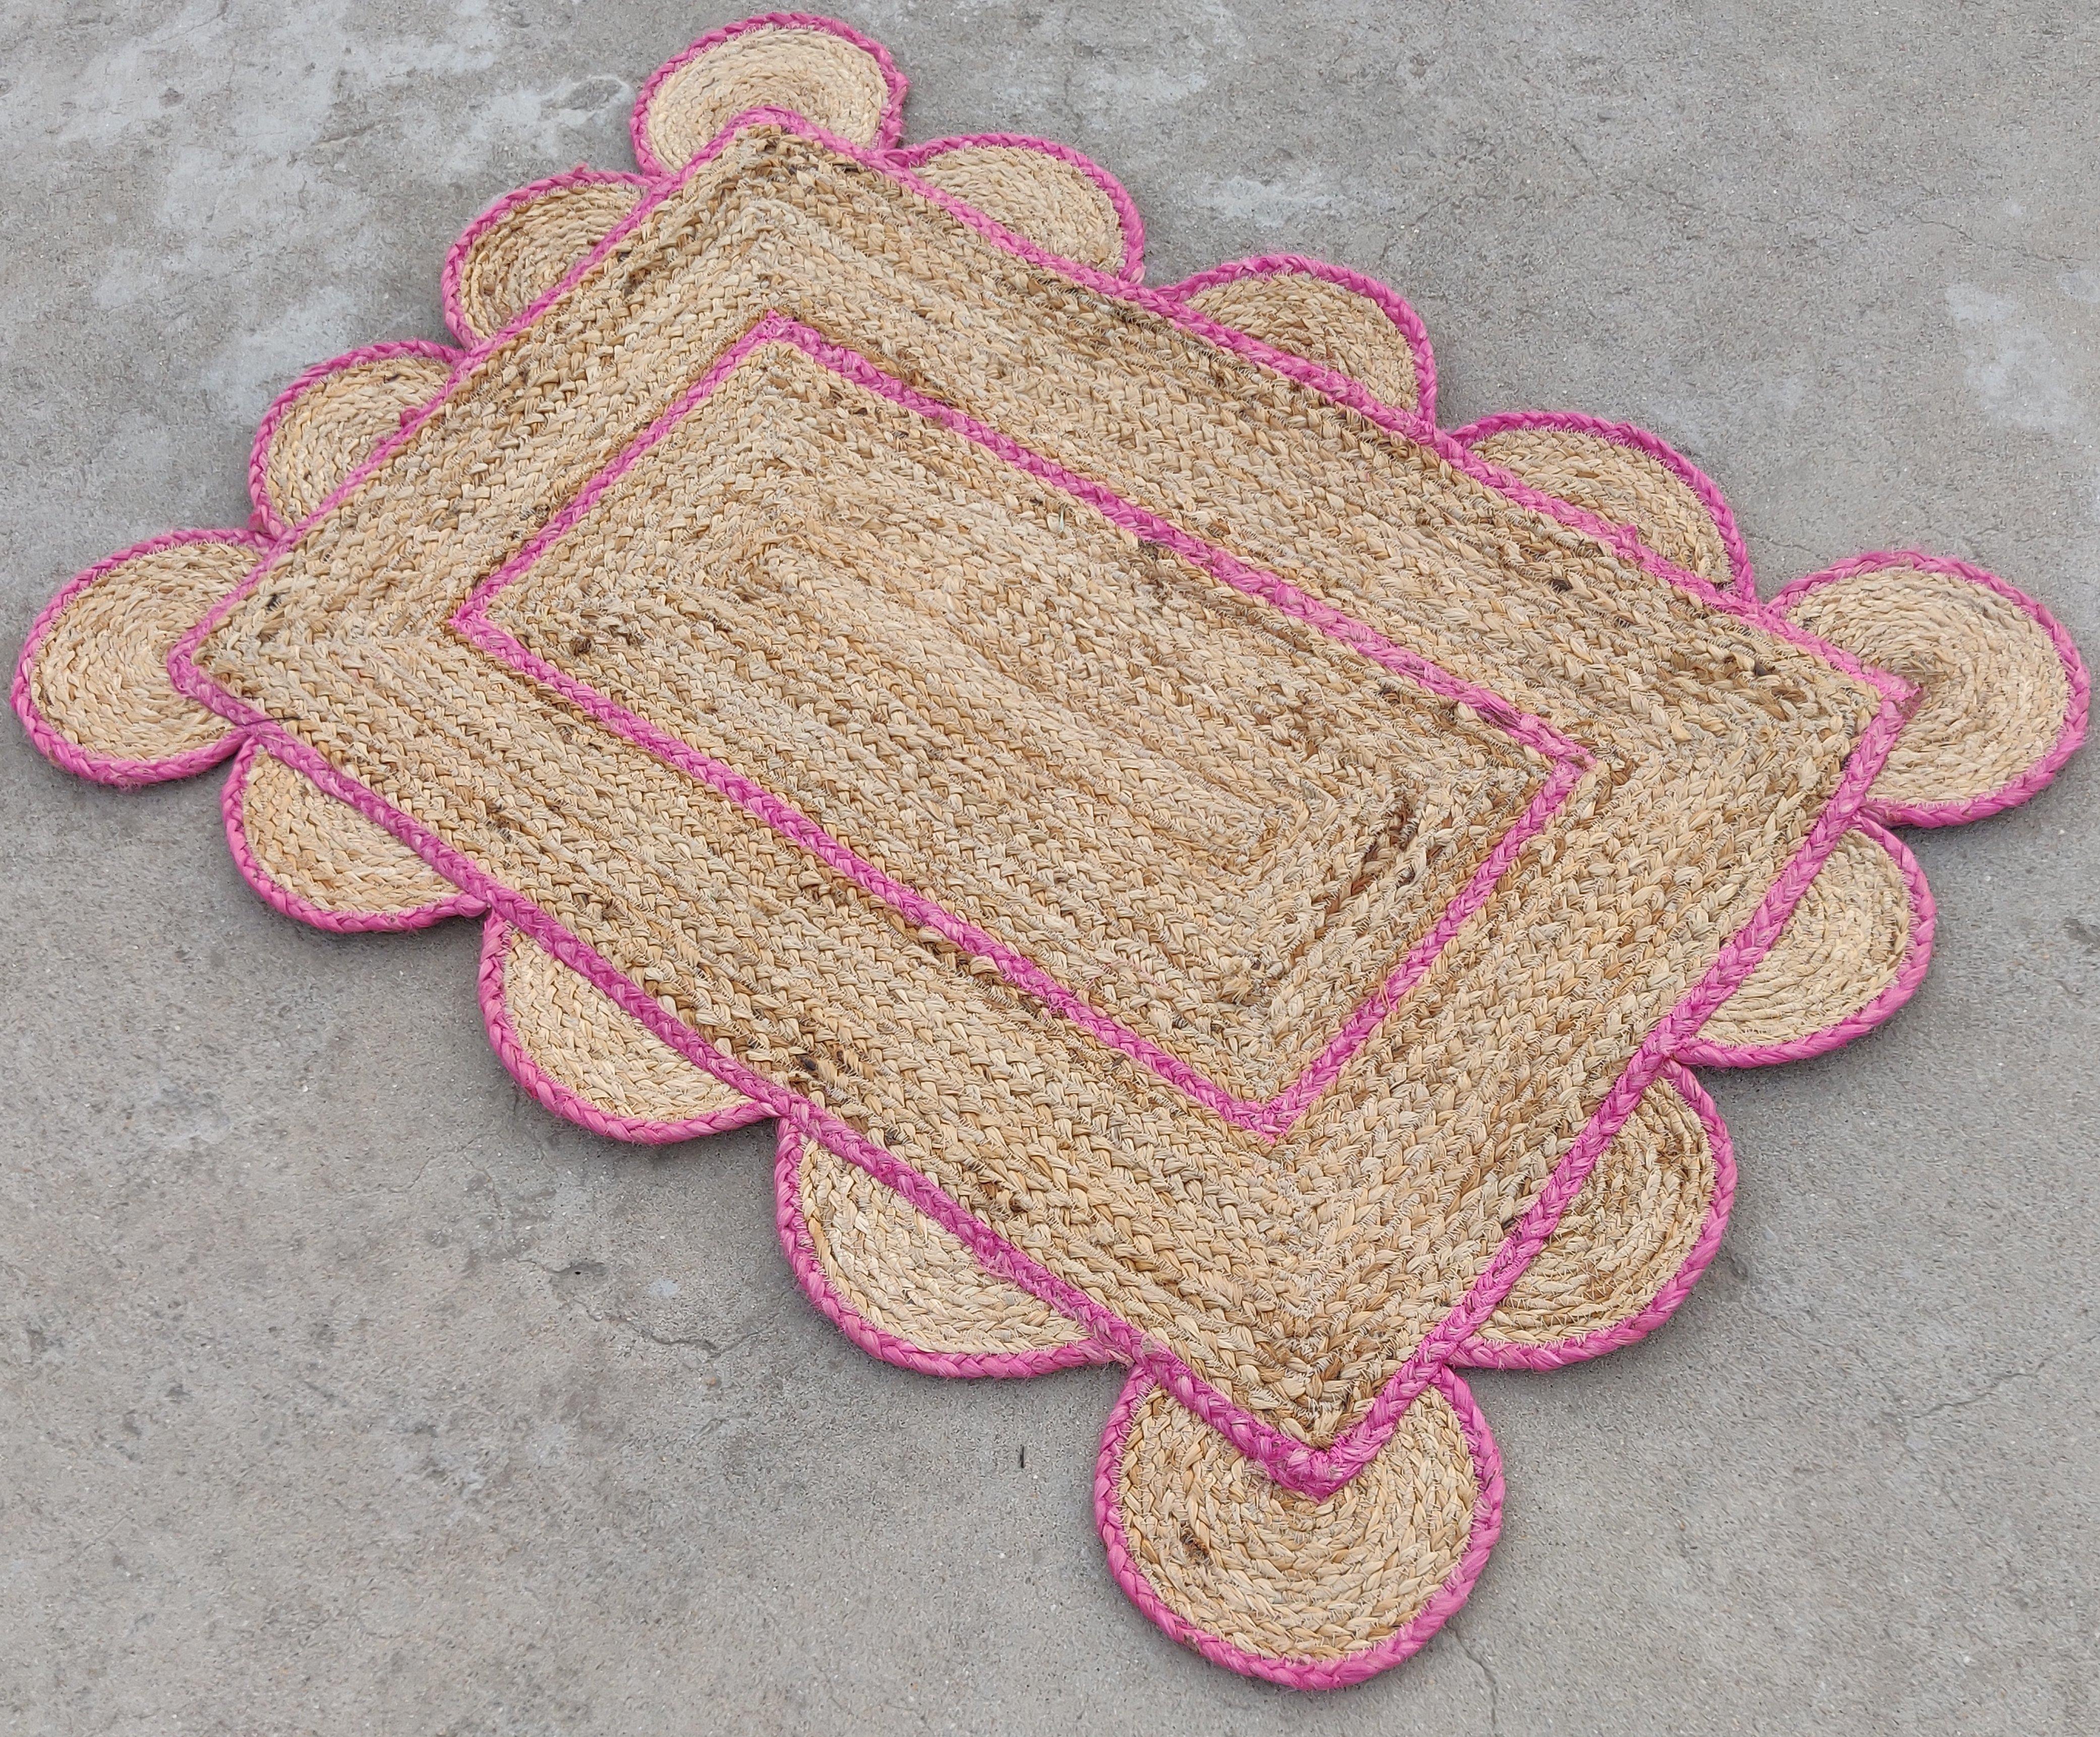 Handmade Jute Scalloped Rug, Natural Jute Dhurrie with Pink Border -2'x3'

These special flat-weave dhurries are hand-woven with 15 ply 100% cotton yarn. Due to the special manufacturing techniques used to create our rugs, the size and color of each